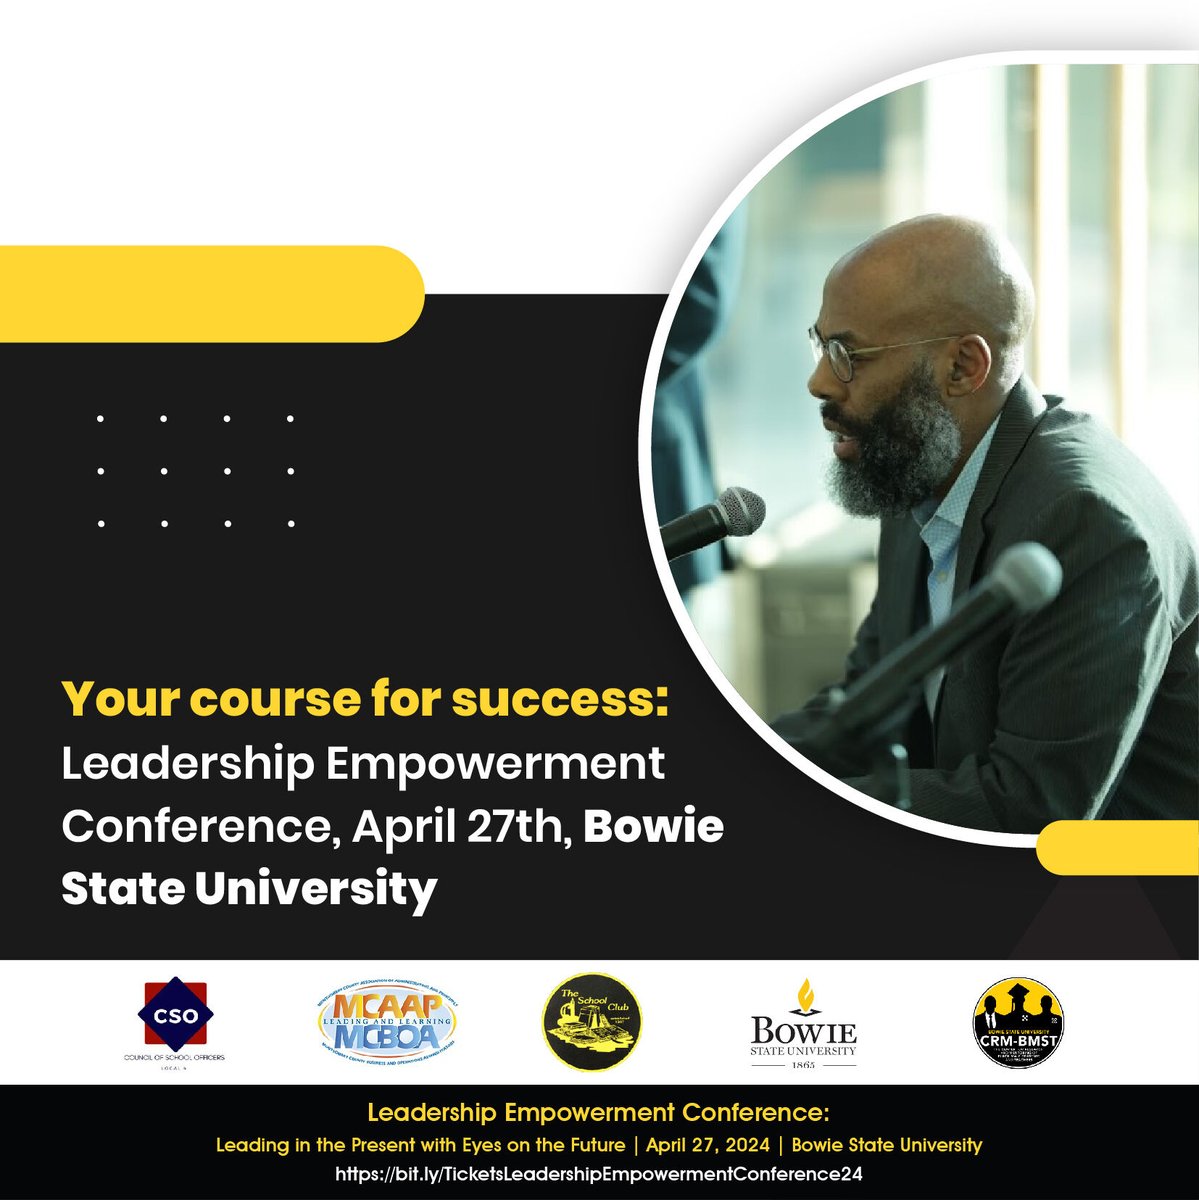 Join education leaders, industry experts, and aspiring professionals alike at the Leadership Empowerment Conference: Leading in the Present with Eyes on the Future, hosted at Bowie State University on April 27th.

Buy Tickets Today:🌐 bit.ly/TicketsLeaders…

#personalfinance